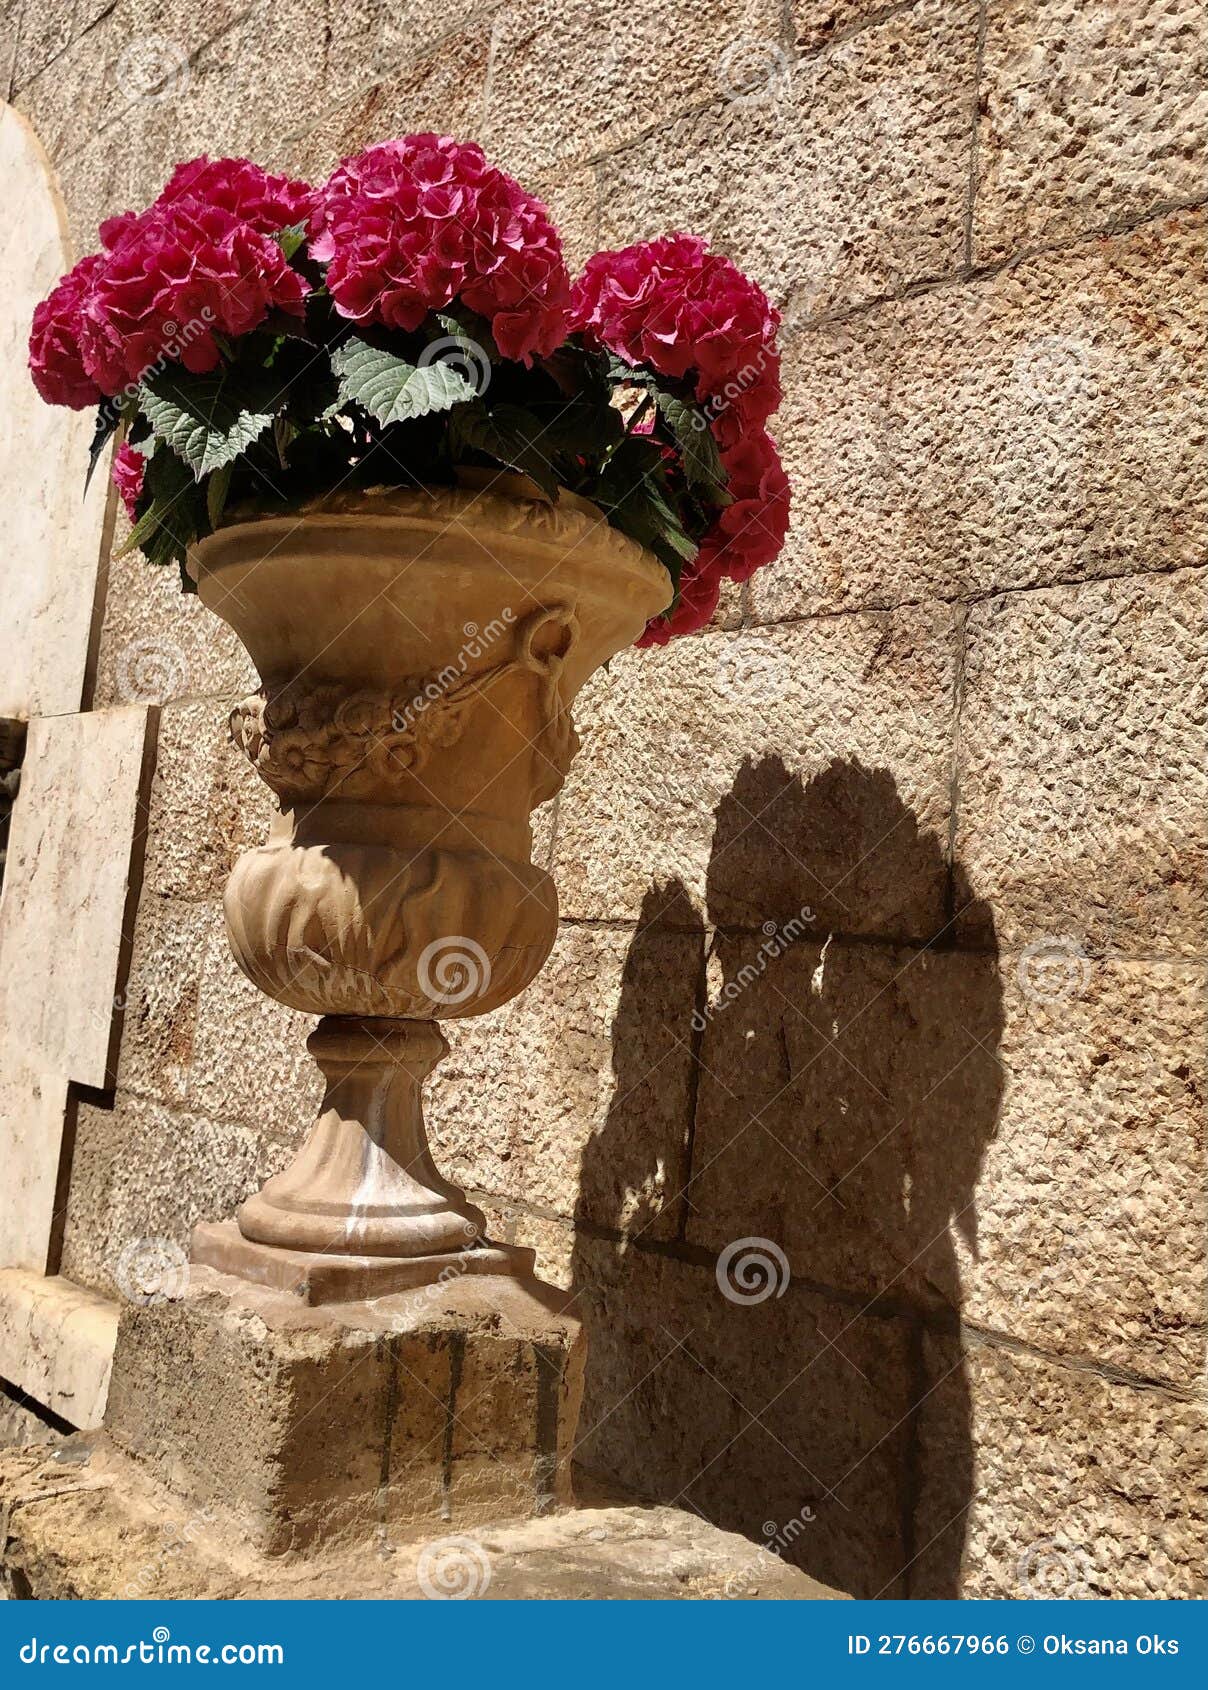 flowers in a stone pot.